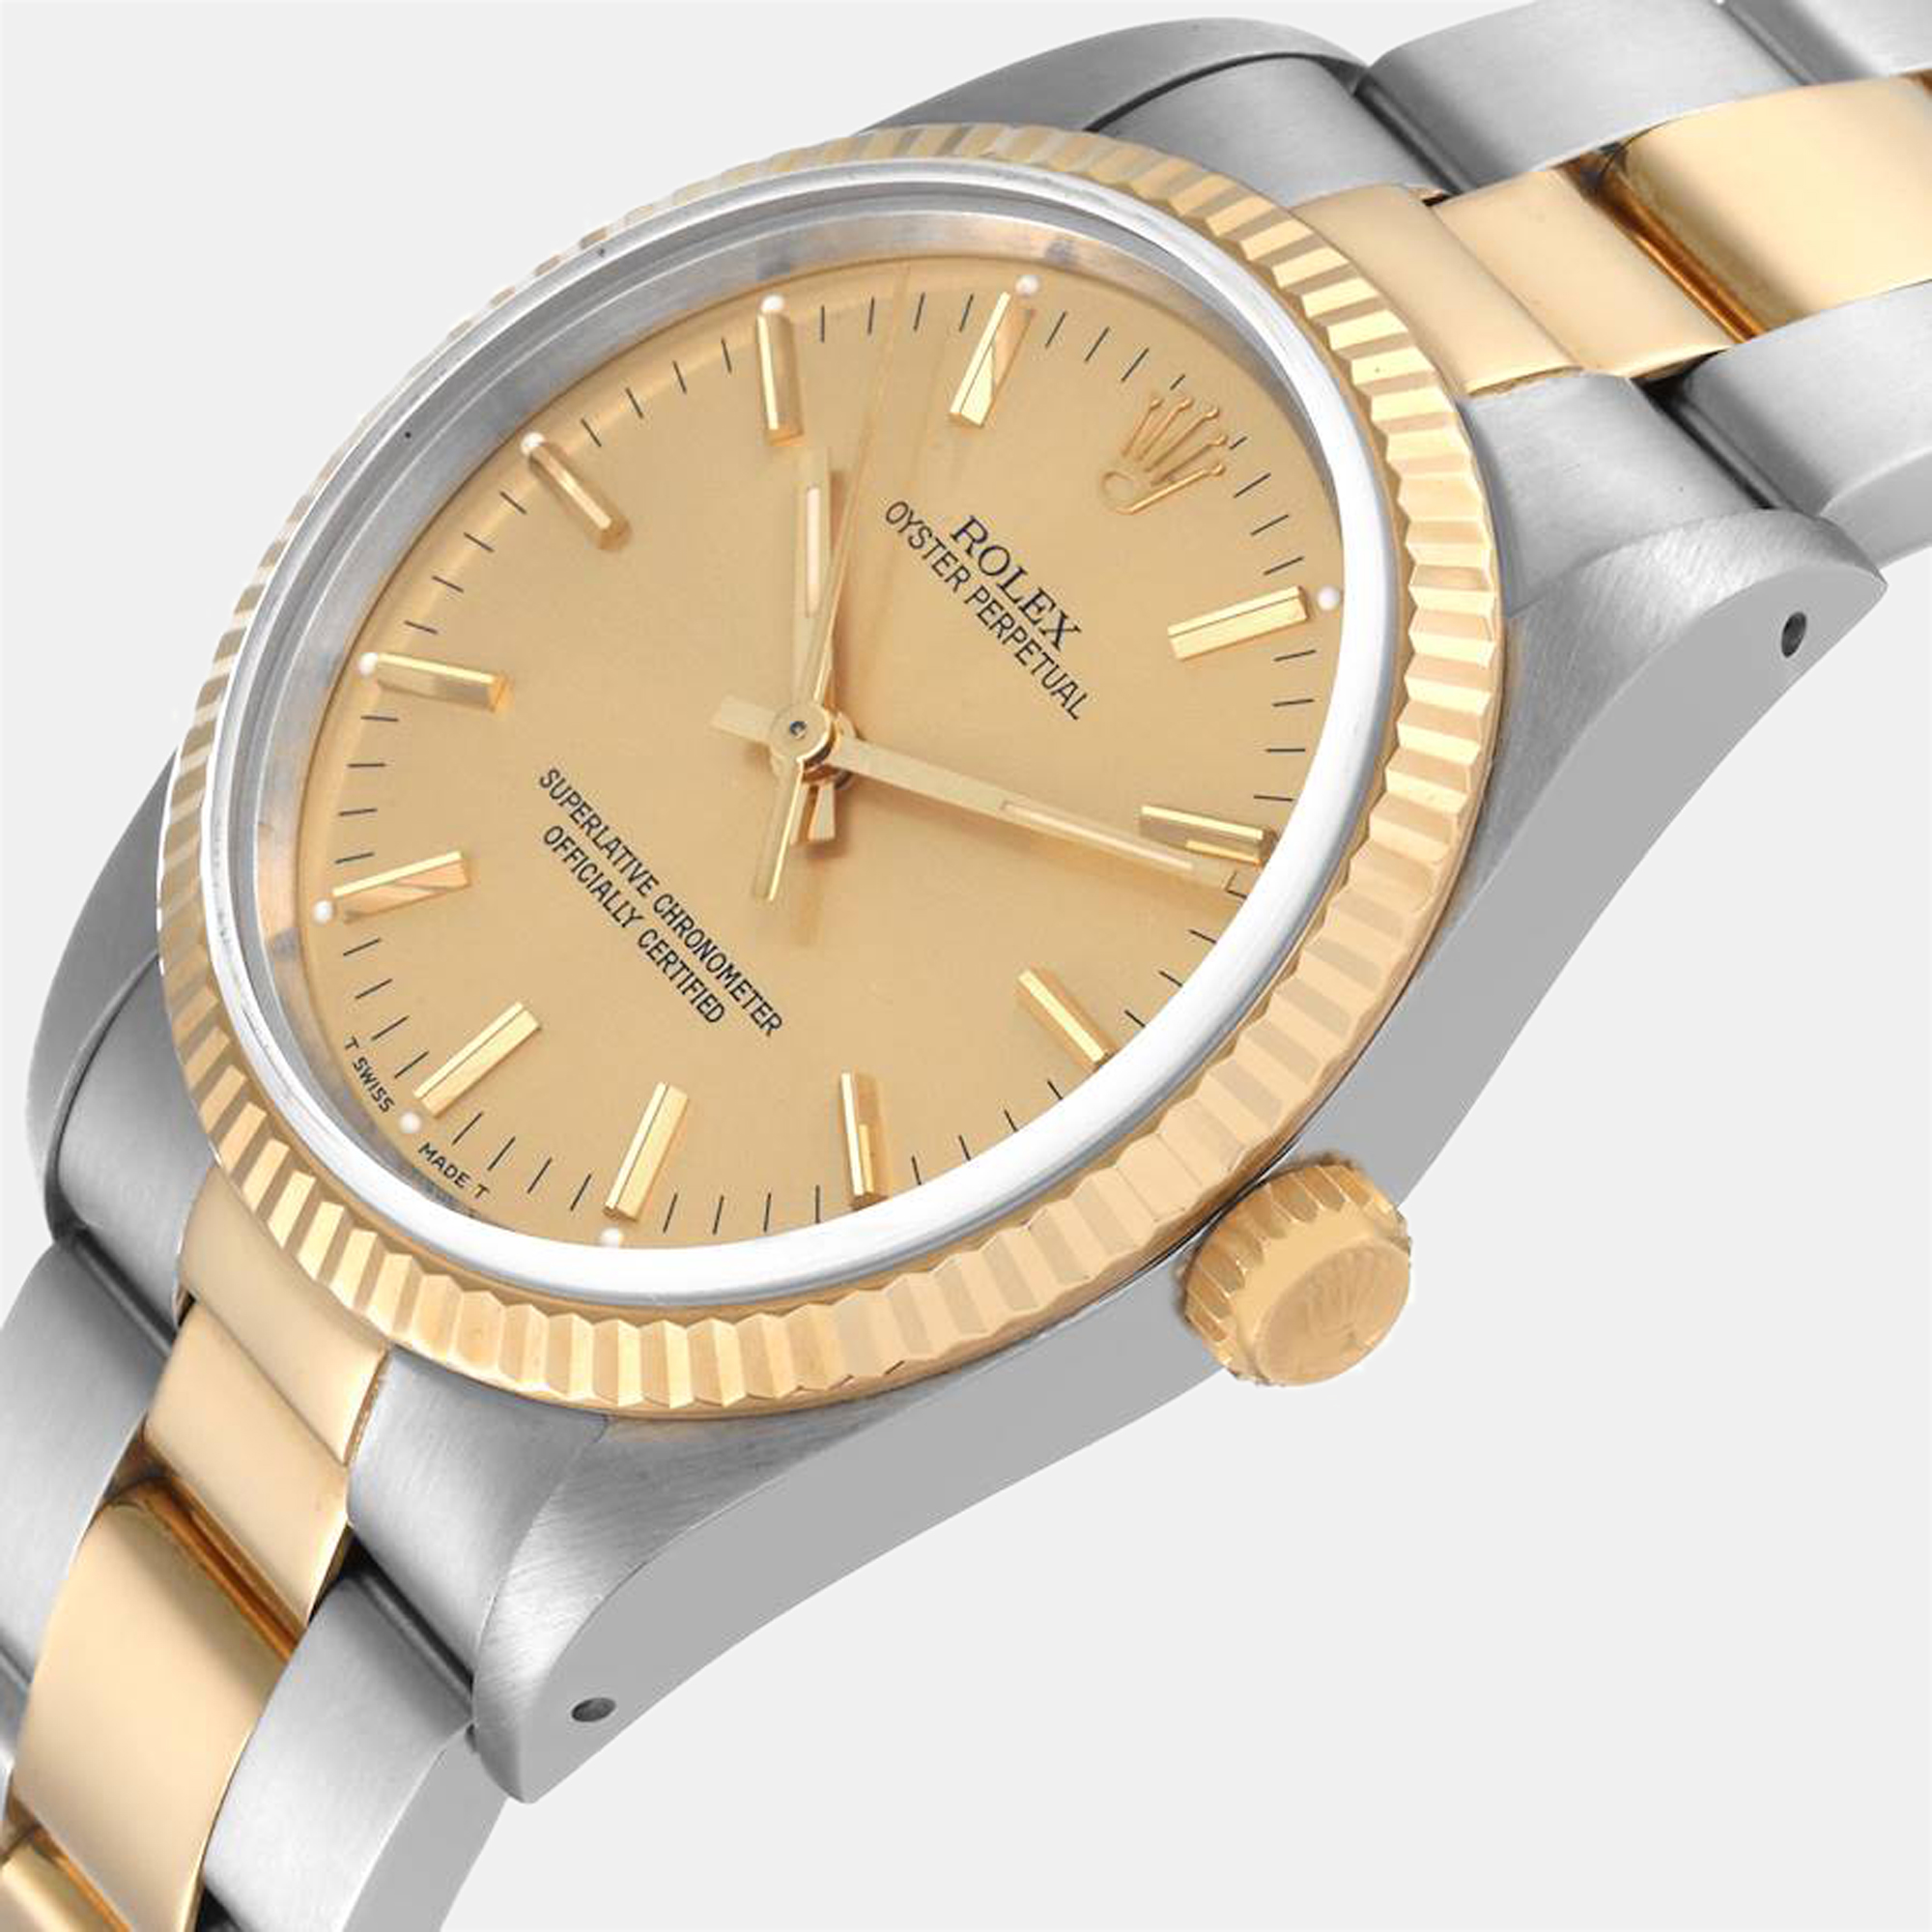 

Rolex Champagne 18K Yellow Gold And Stainless Steel Oyster Perpetual 14233 Men's Wristwatch 34 mm